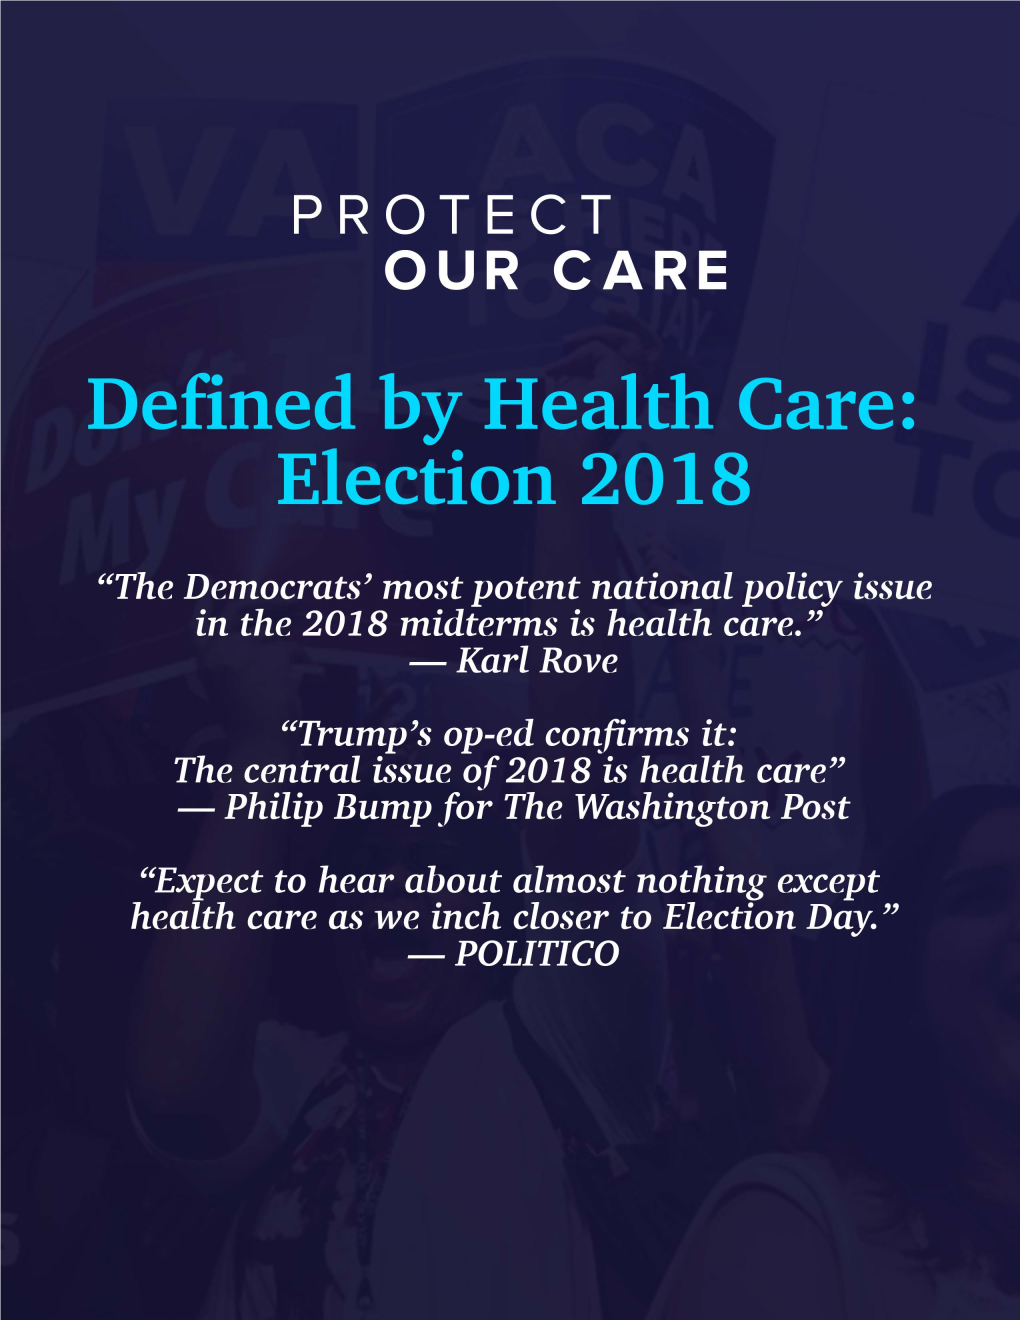 Defined by Health Care: Election 2018